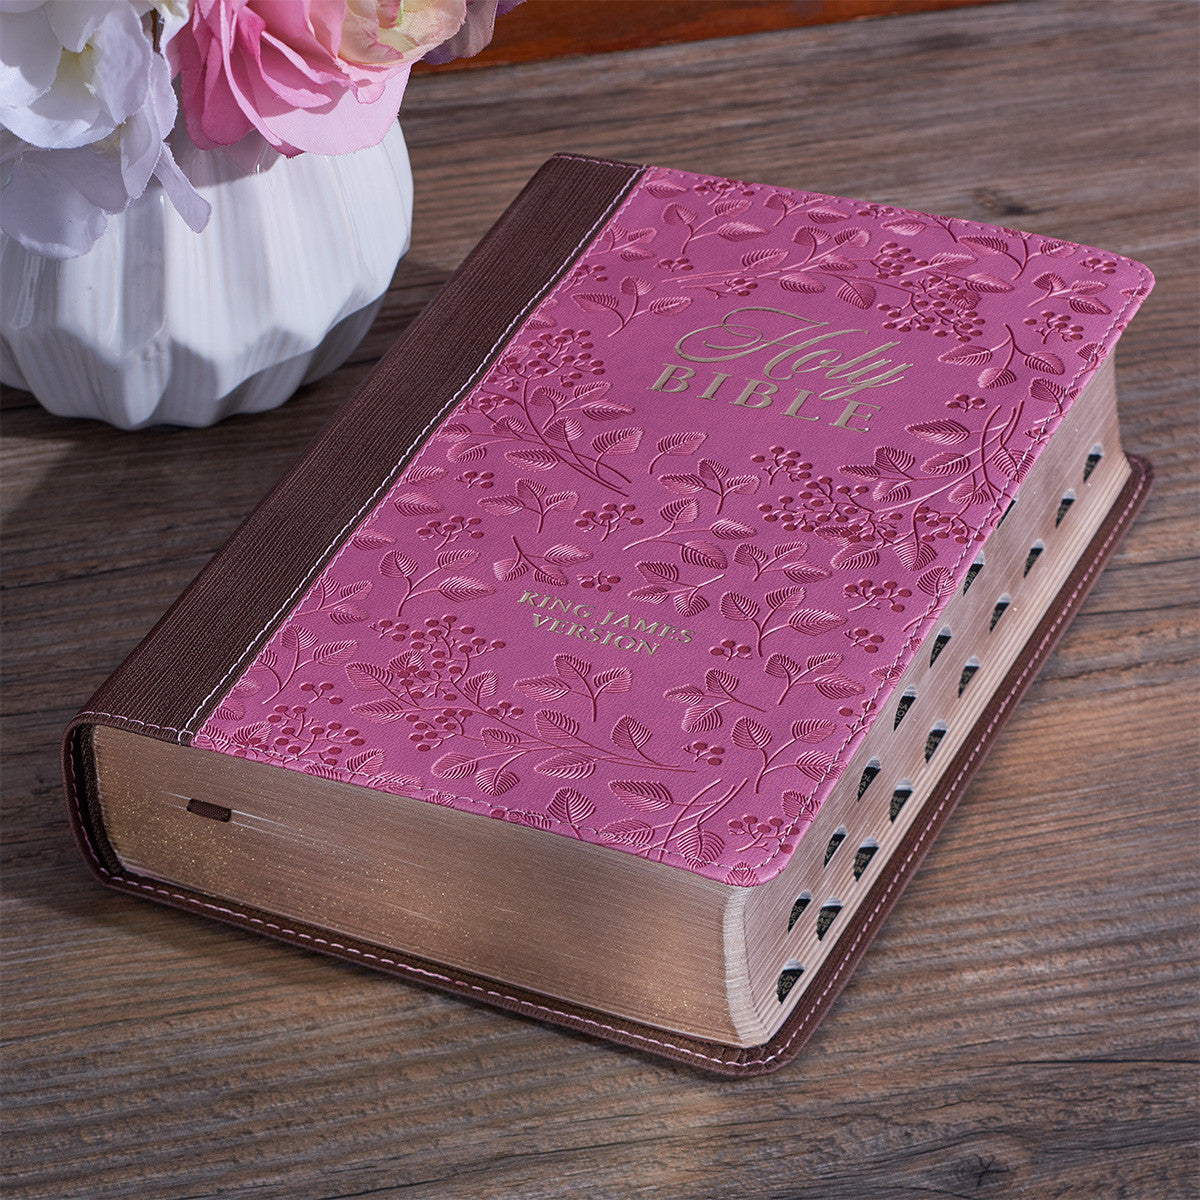 Pink Faux Leather Giant Print Bible Full-size King James Version with  Indexed